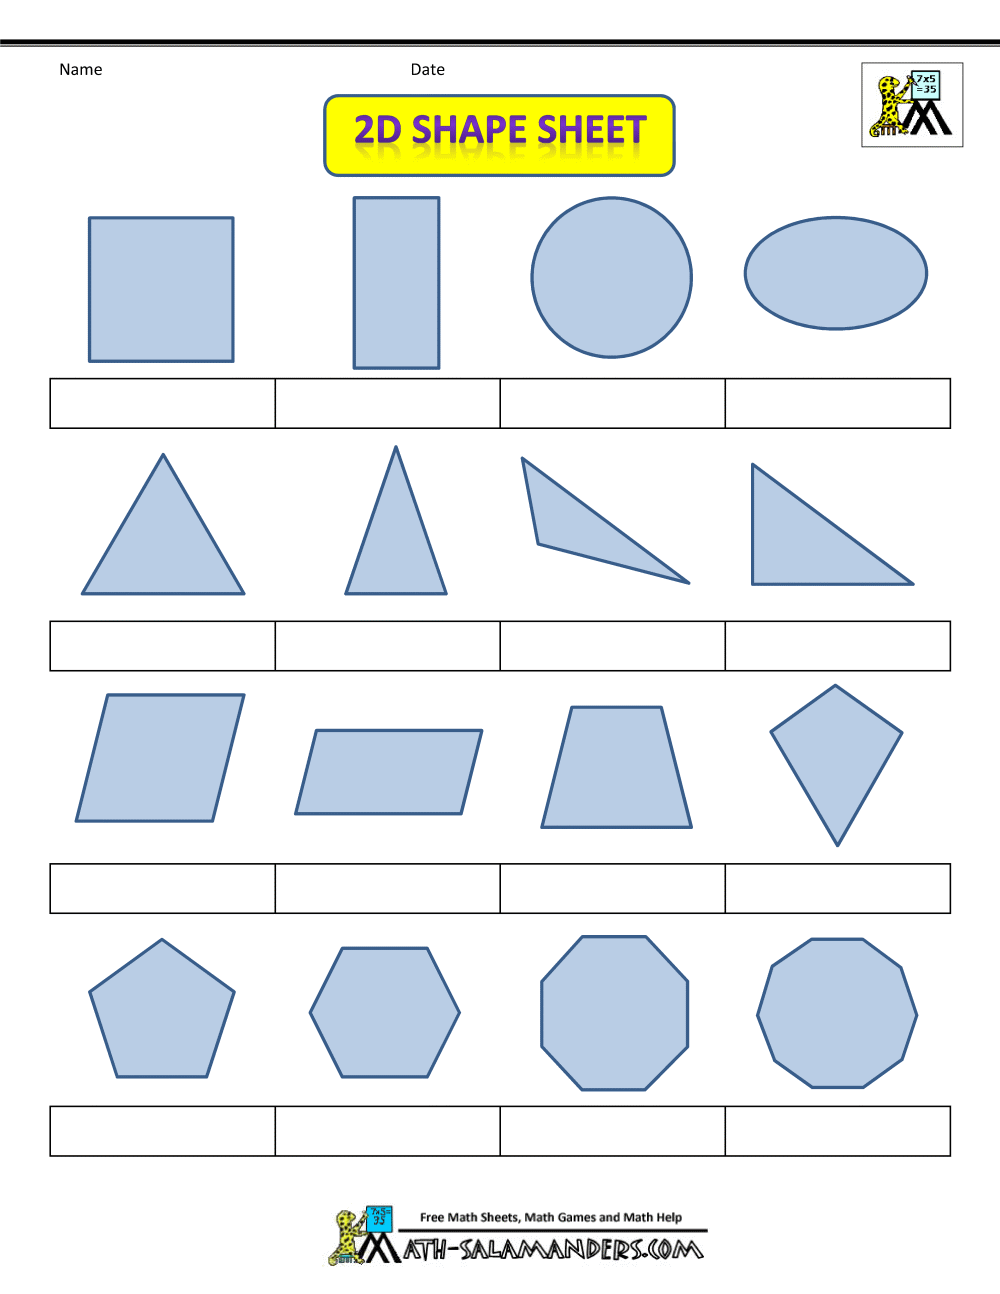 22 D And 22 D Shapes - Lessons - Blendspace With Regard To 2 Dimensional Shapes Worksheet